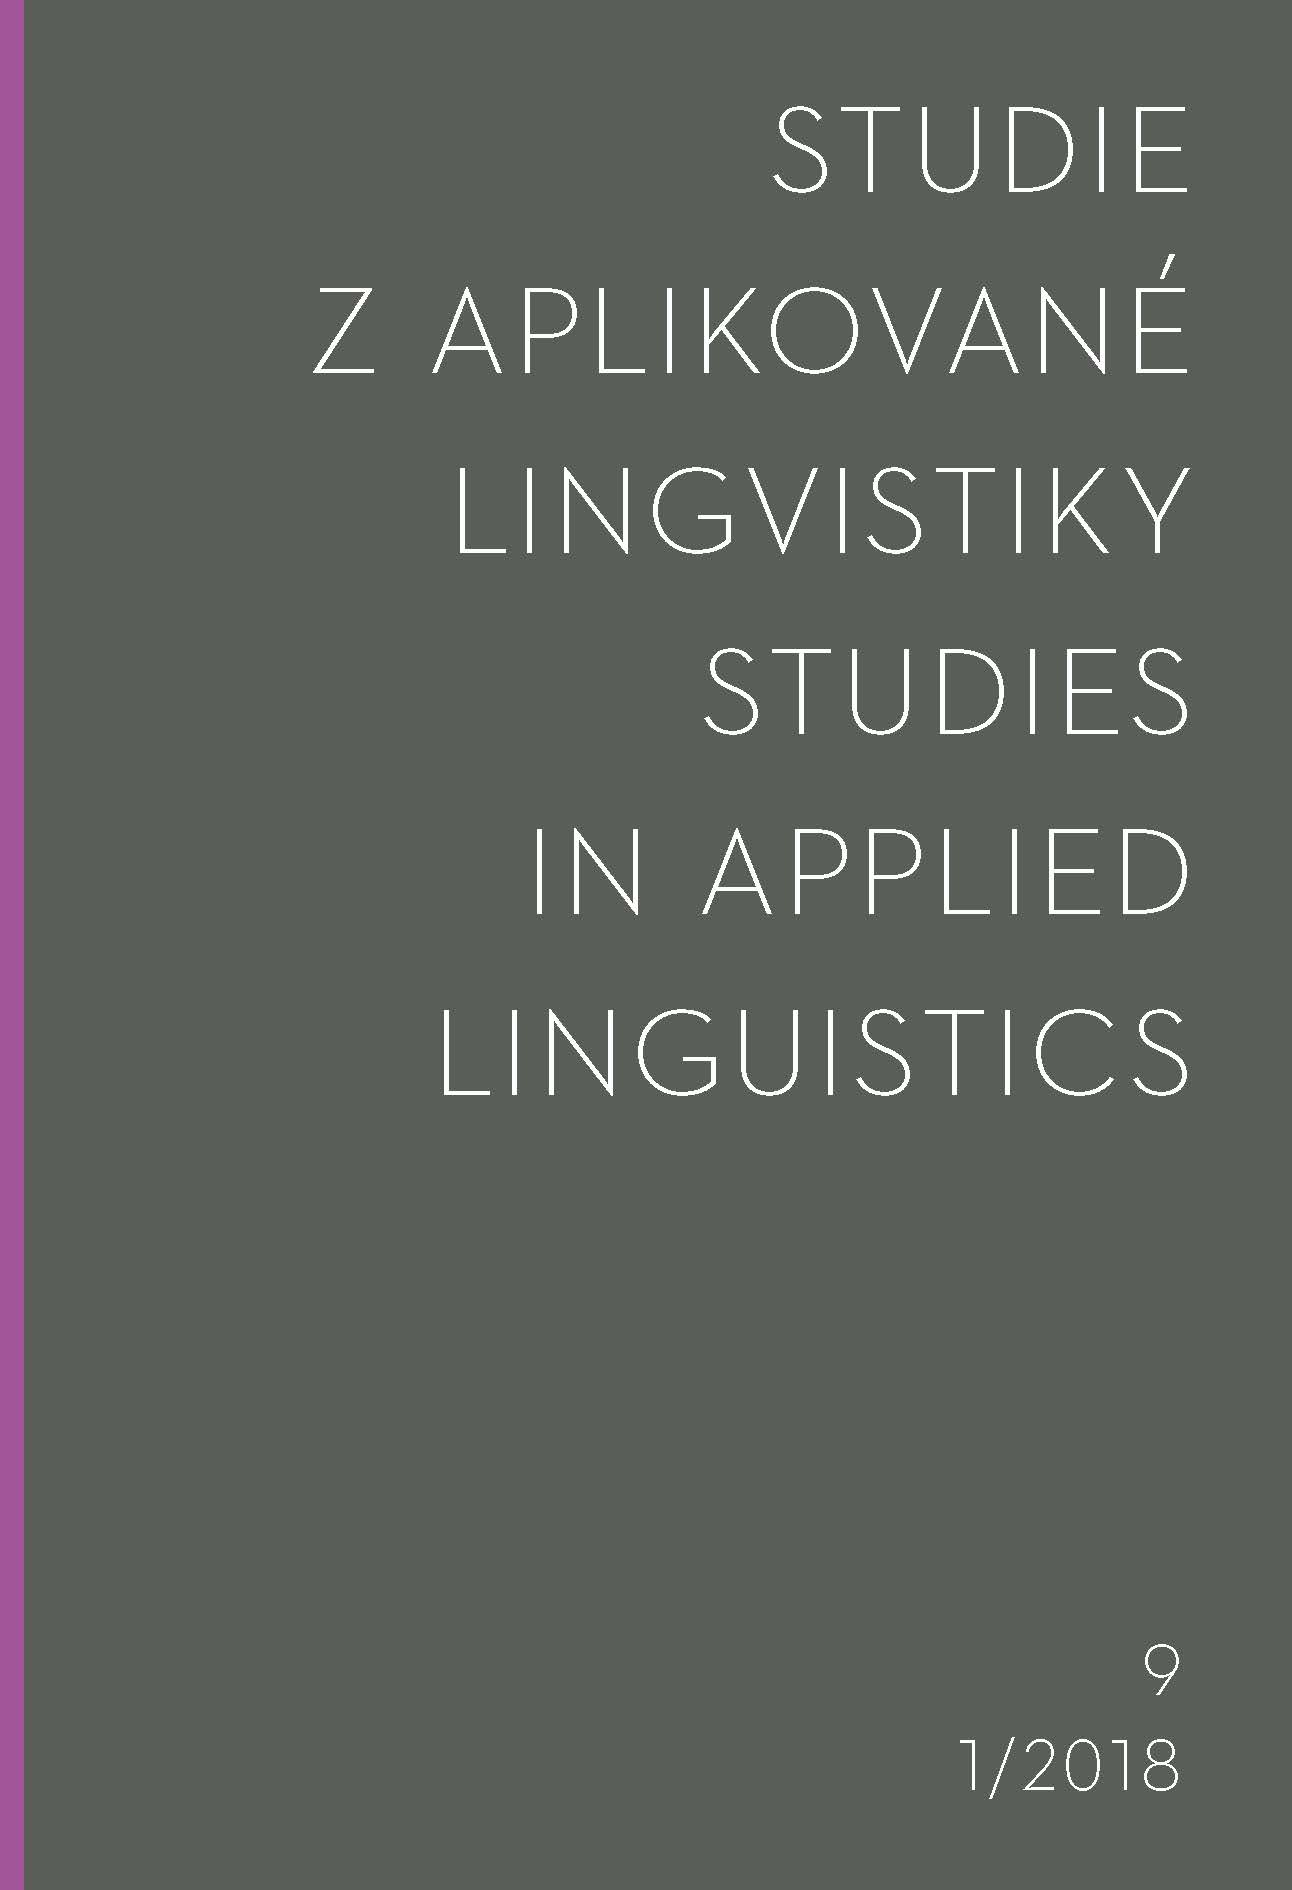 Foreign or Native-like? The Attitudes of Czech EFL Learners Towards Accents of English and Their Use as Pronunciation Models Cover Image